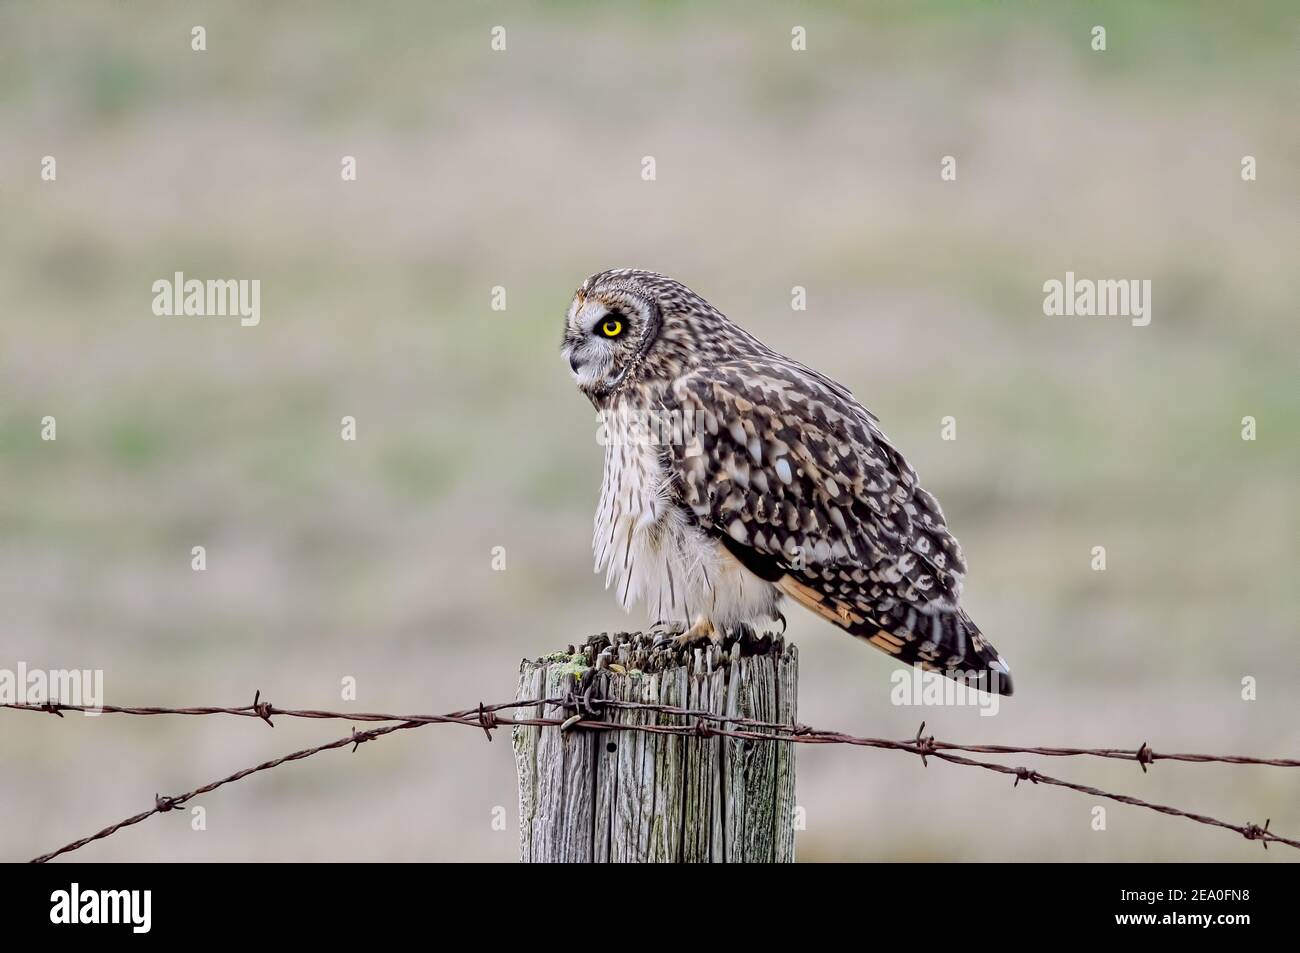 A Short-eared Owl (Asio flammeus) perched on a fence post with light colored background in Richmond, B. C., Canada. Stock Photo